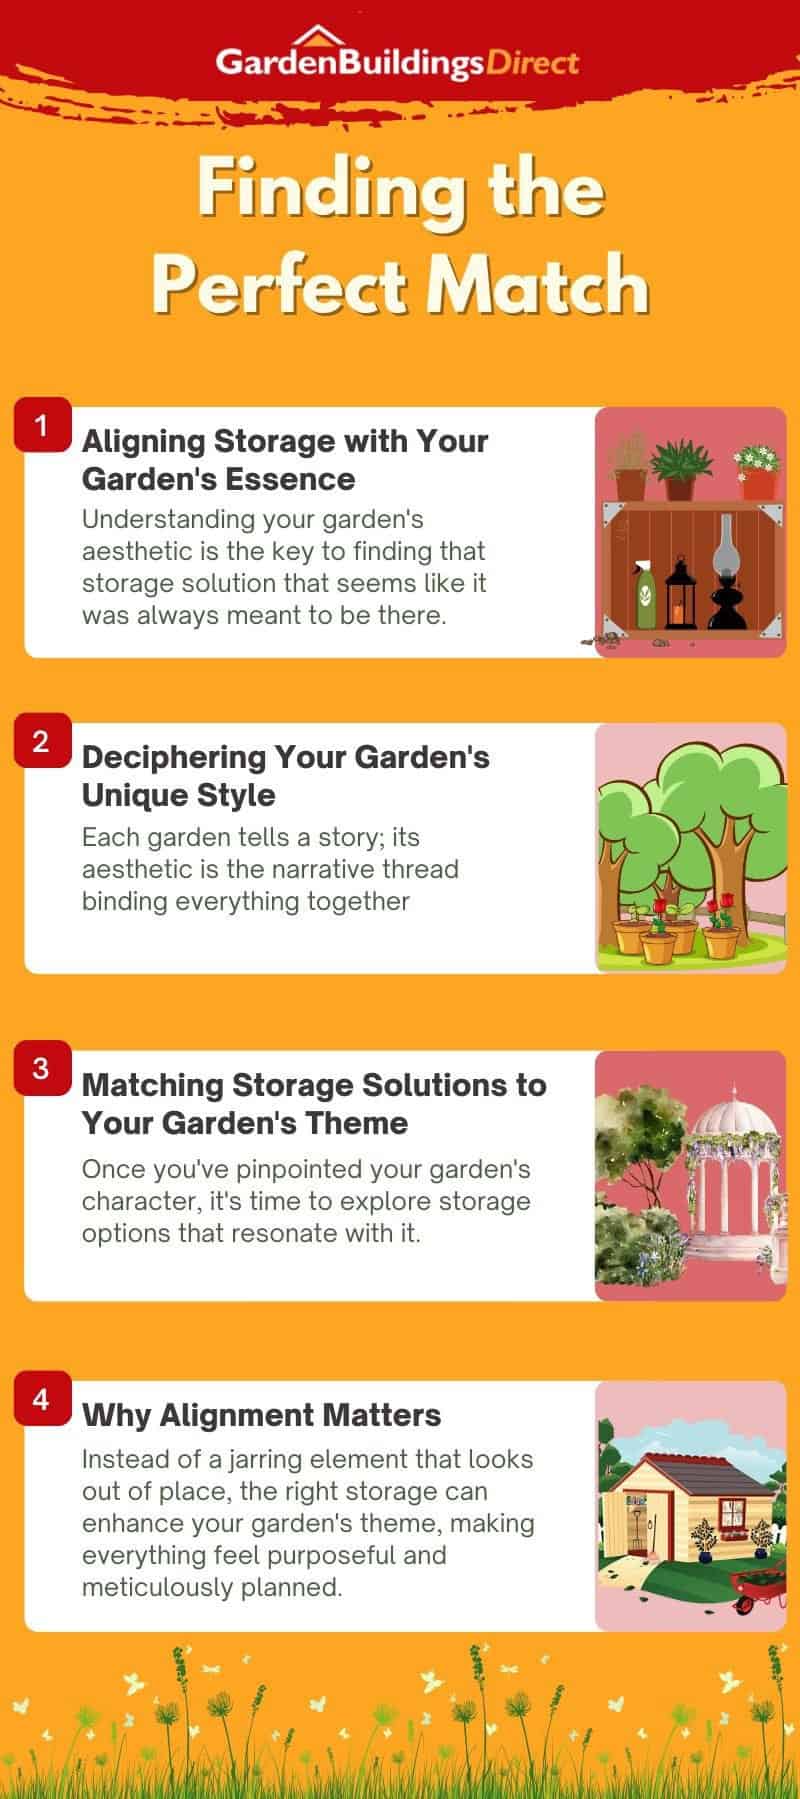 A colourful infographic titled "Finding the Perfect Match" detailing four steps to selecting the right garden furniture for your garden